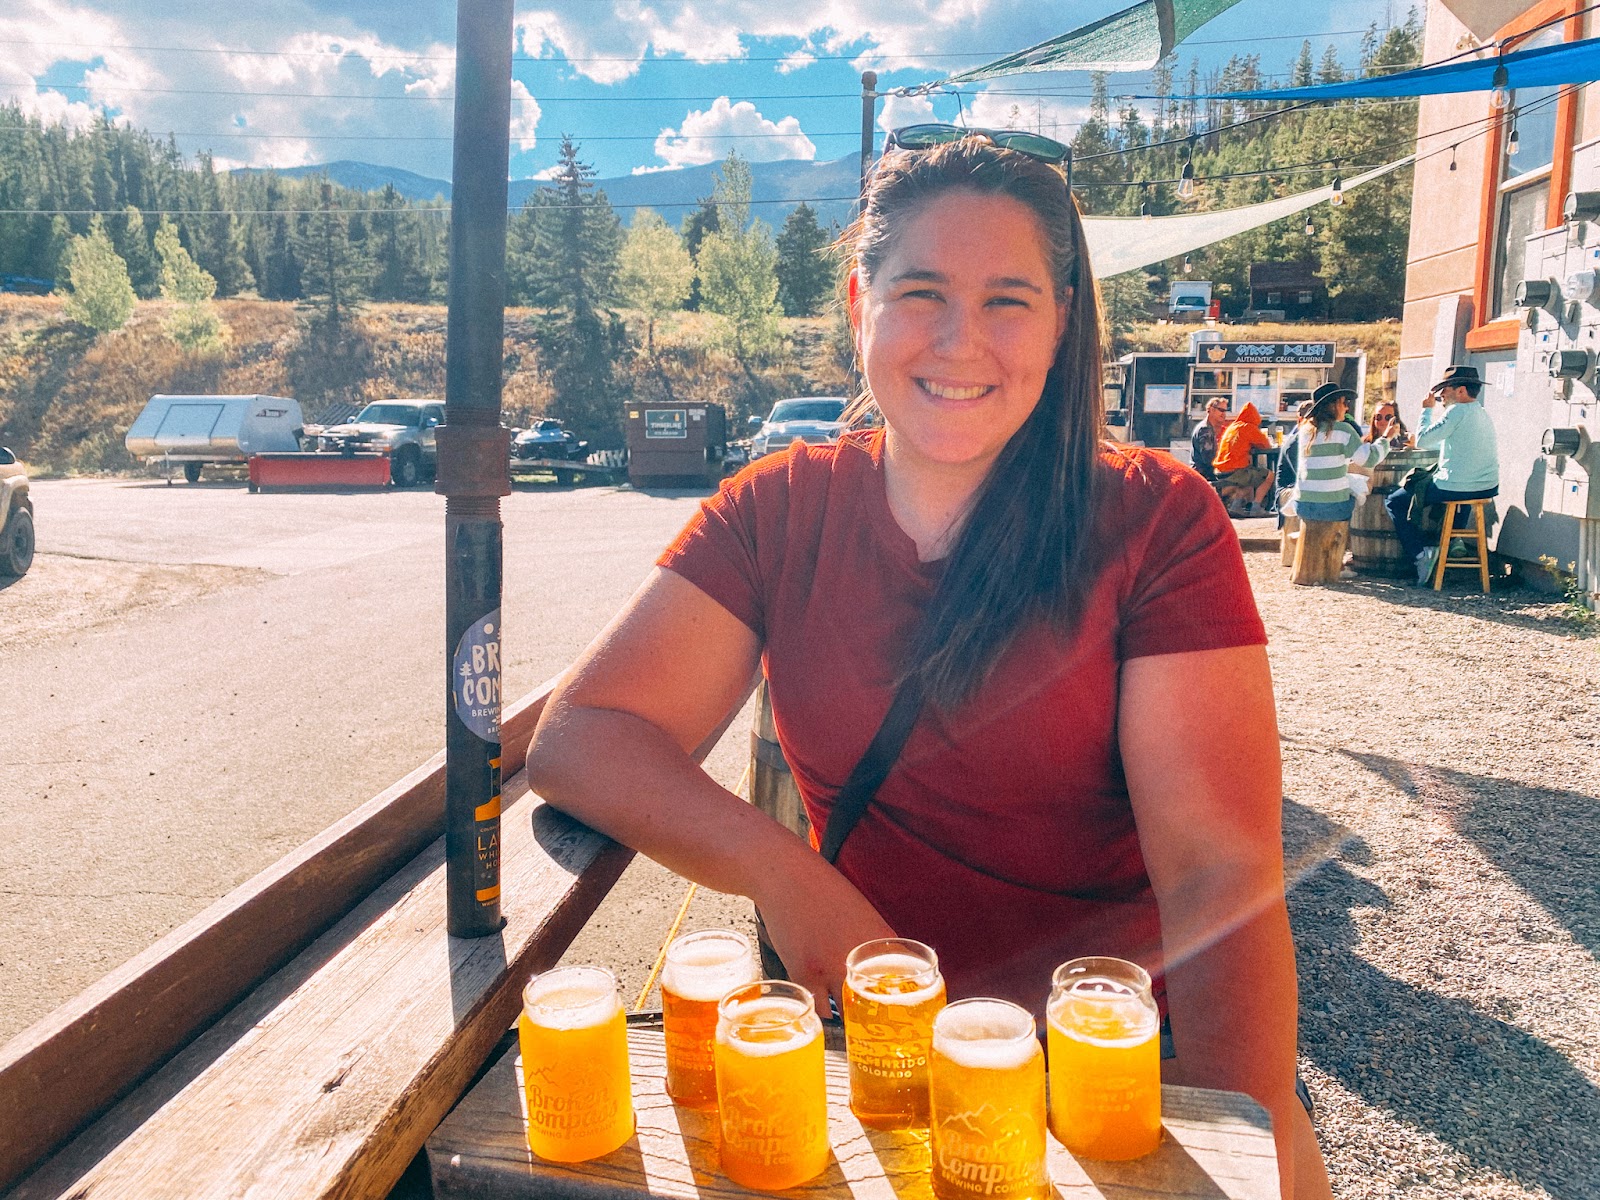 Allie from the Hoppy Passport is sitting with bottles of beer at an outdoor stand. Behind her is the mountain range and forest.